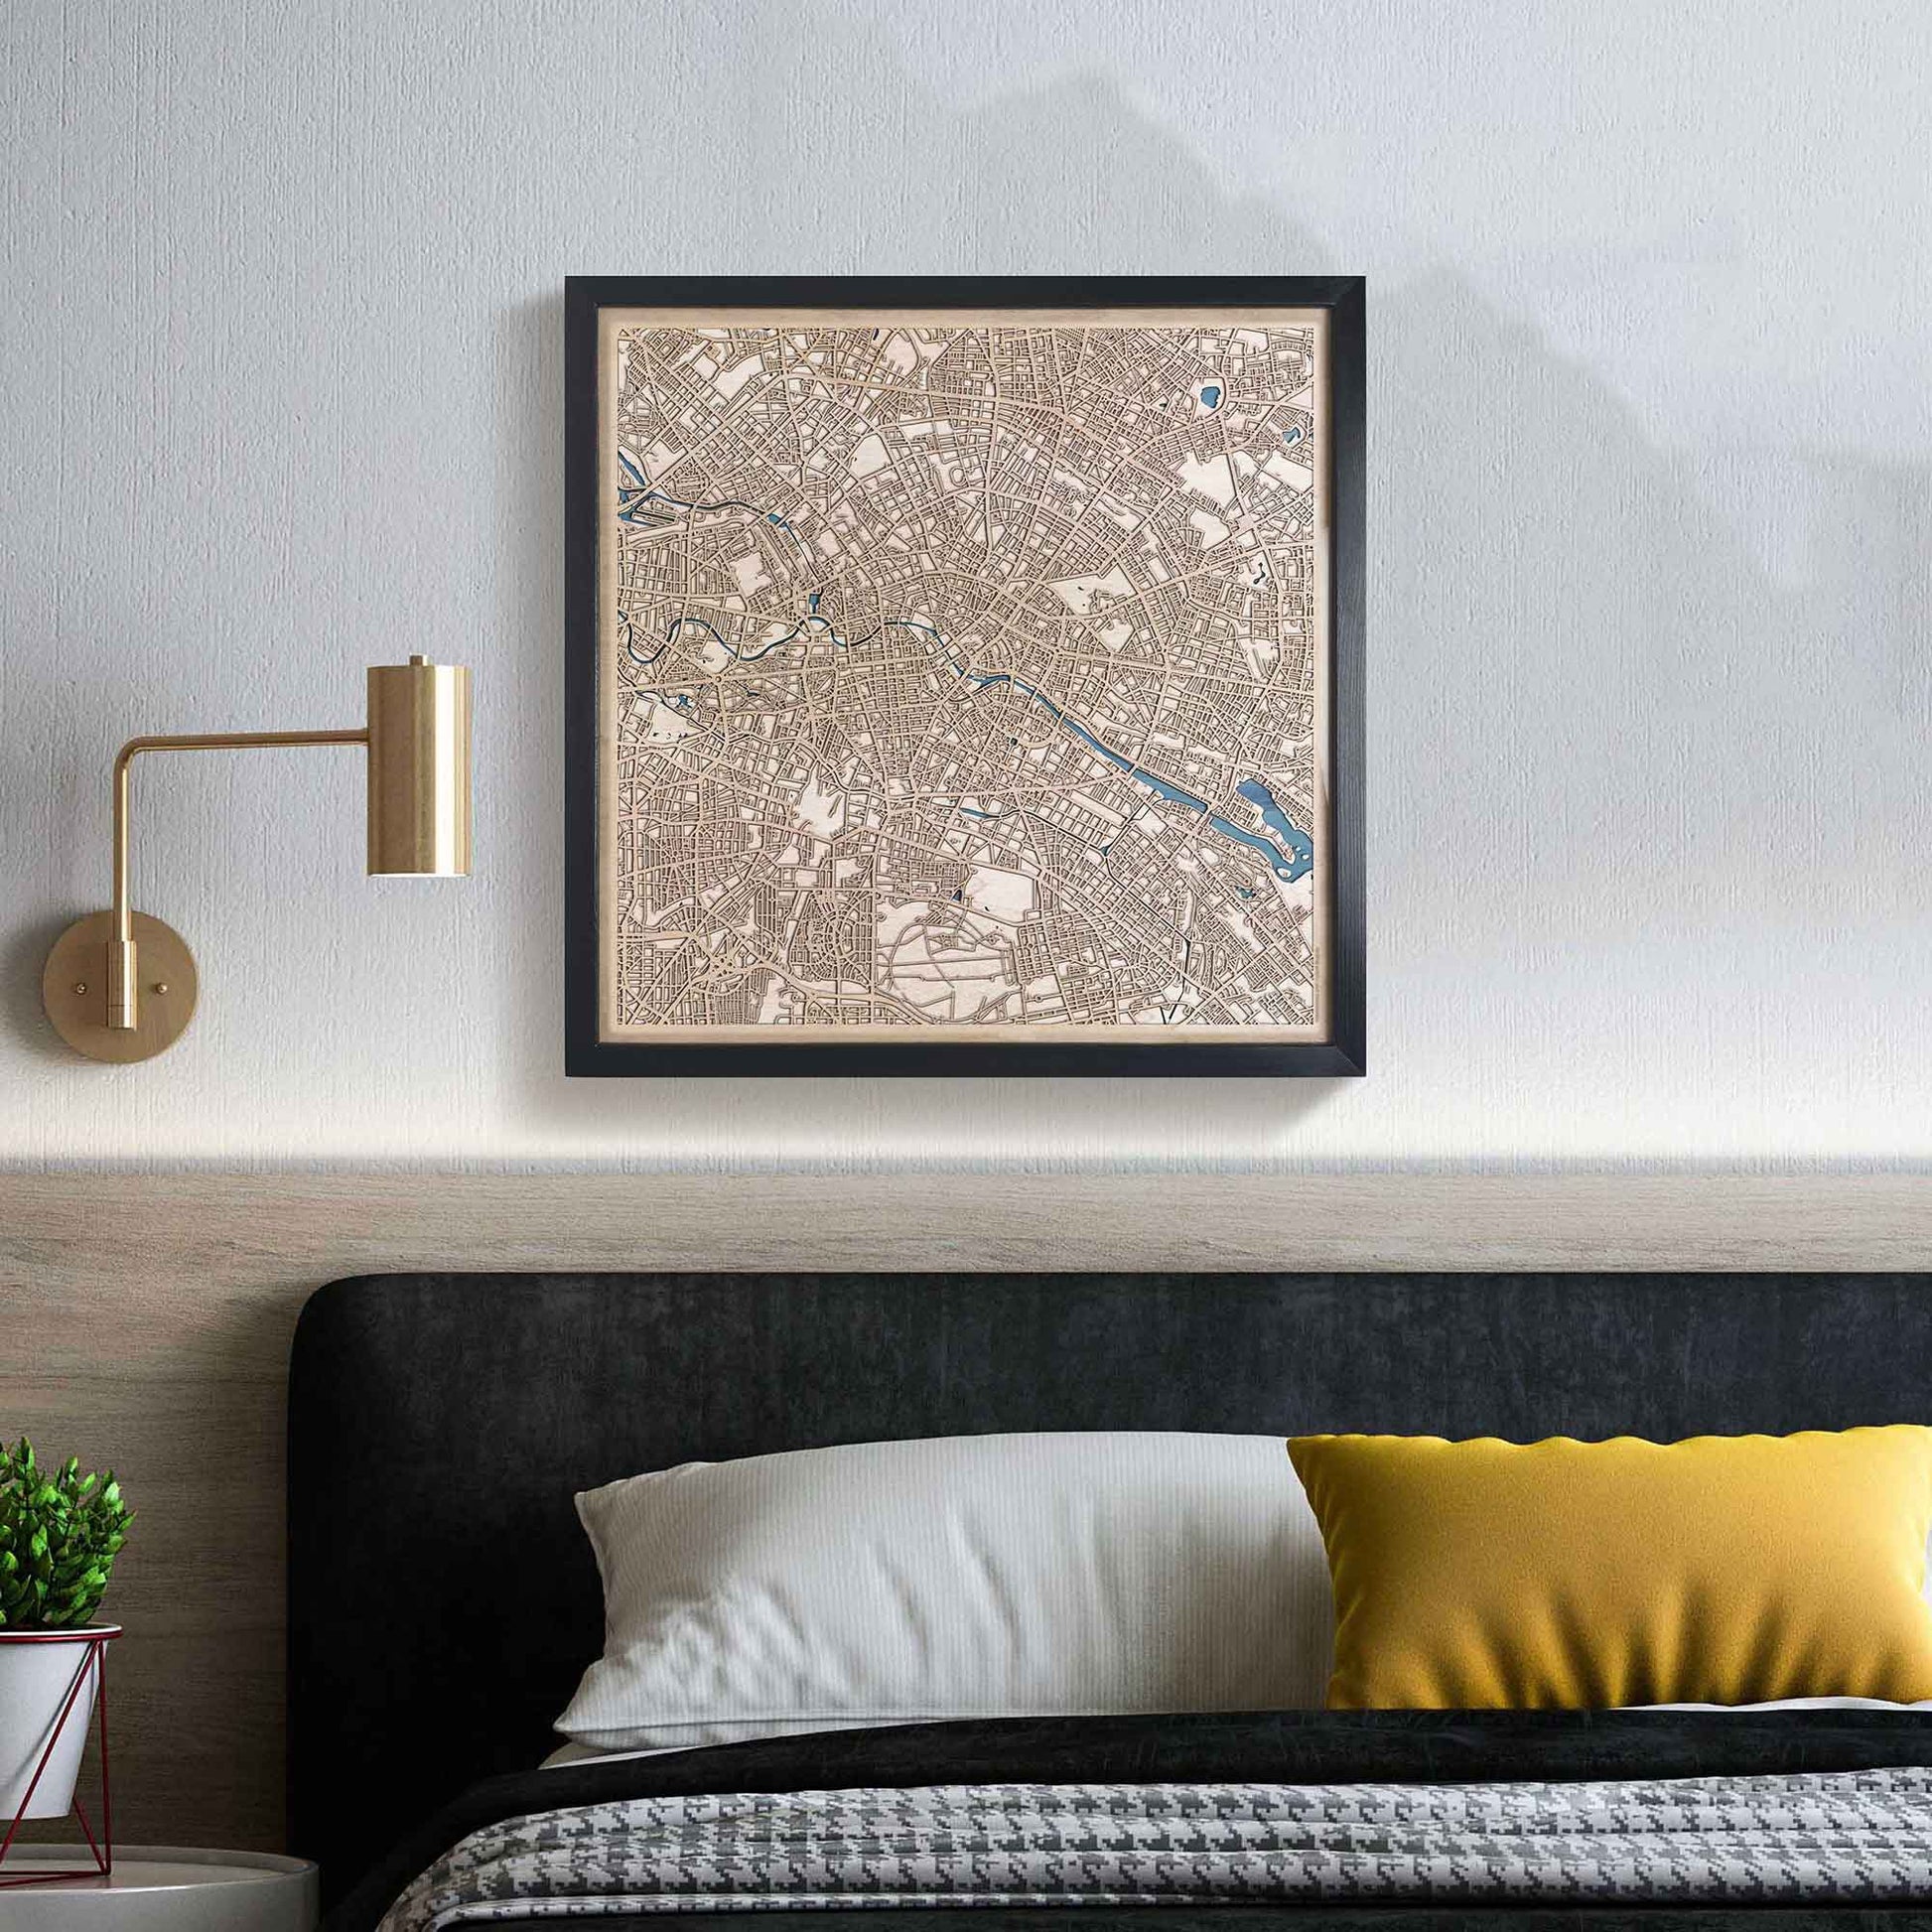 Berlin Wooden Map by CityWood - Custom Wood Map Art - Unique Laser Cut Engraved - Anniversary Gift